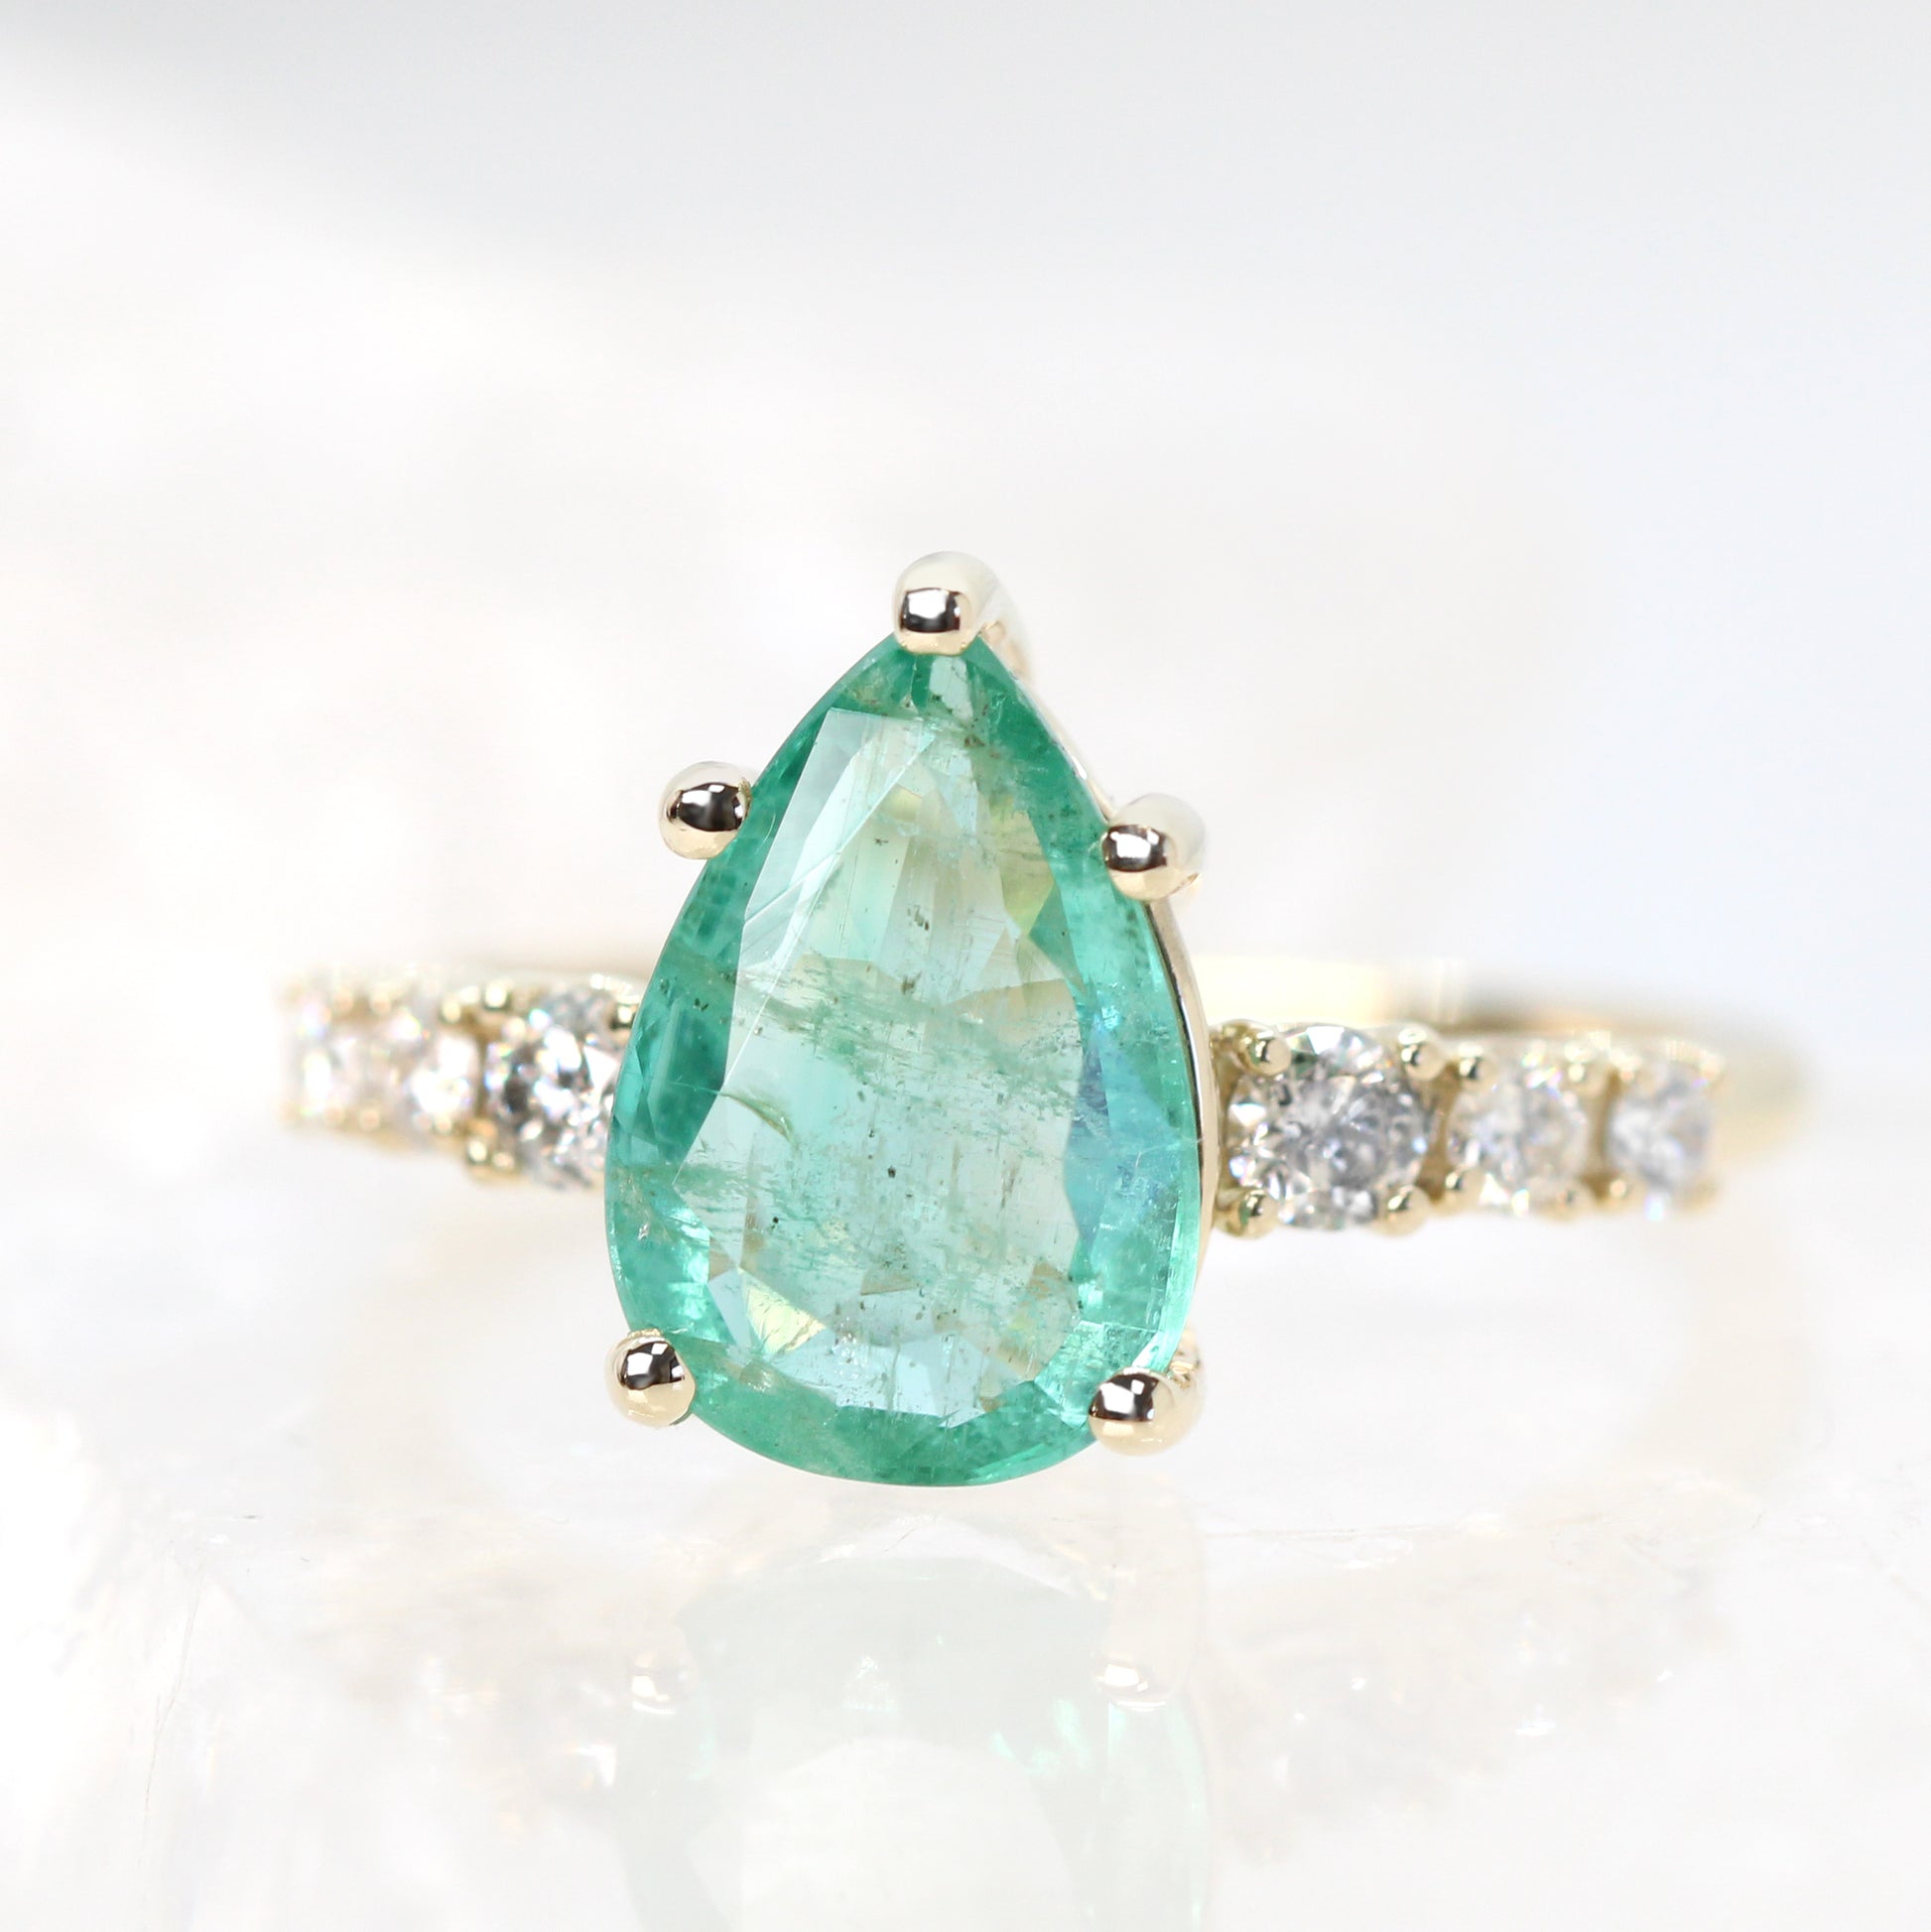 Tina Ring with a 2.50 Carat Pear Emerald and Gray & White Accent Diamonds in 14k Yellow Gold - Ready to Size and Ship - Midwinter Co. Alternative Bridal Rings and Modern Fine Jewelry